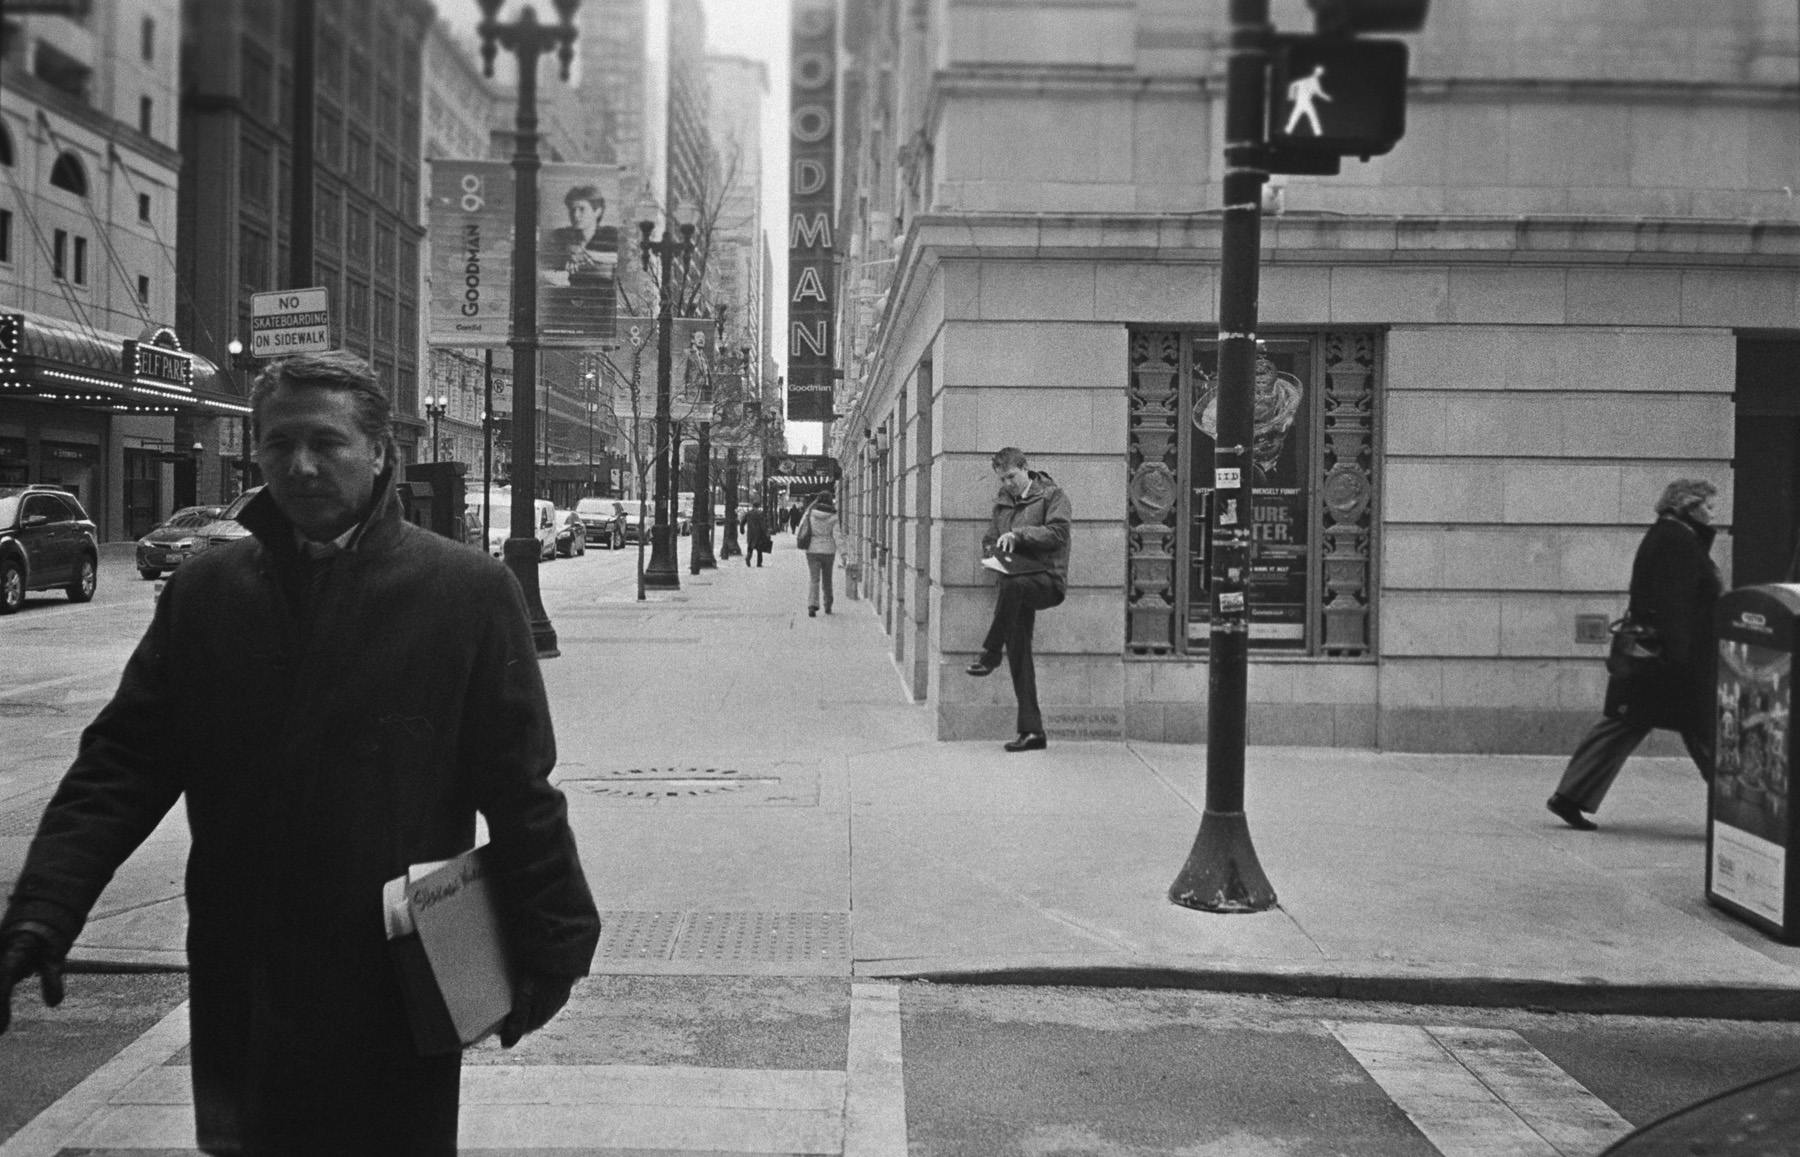 a film shot of a lawyer crossing the street in a dress winter coat, in the background you can see a man leaning up against a building looking through some documents on his knee.